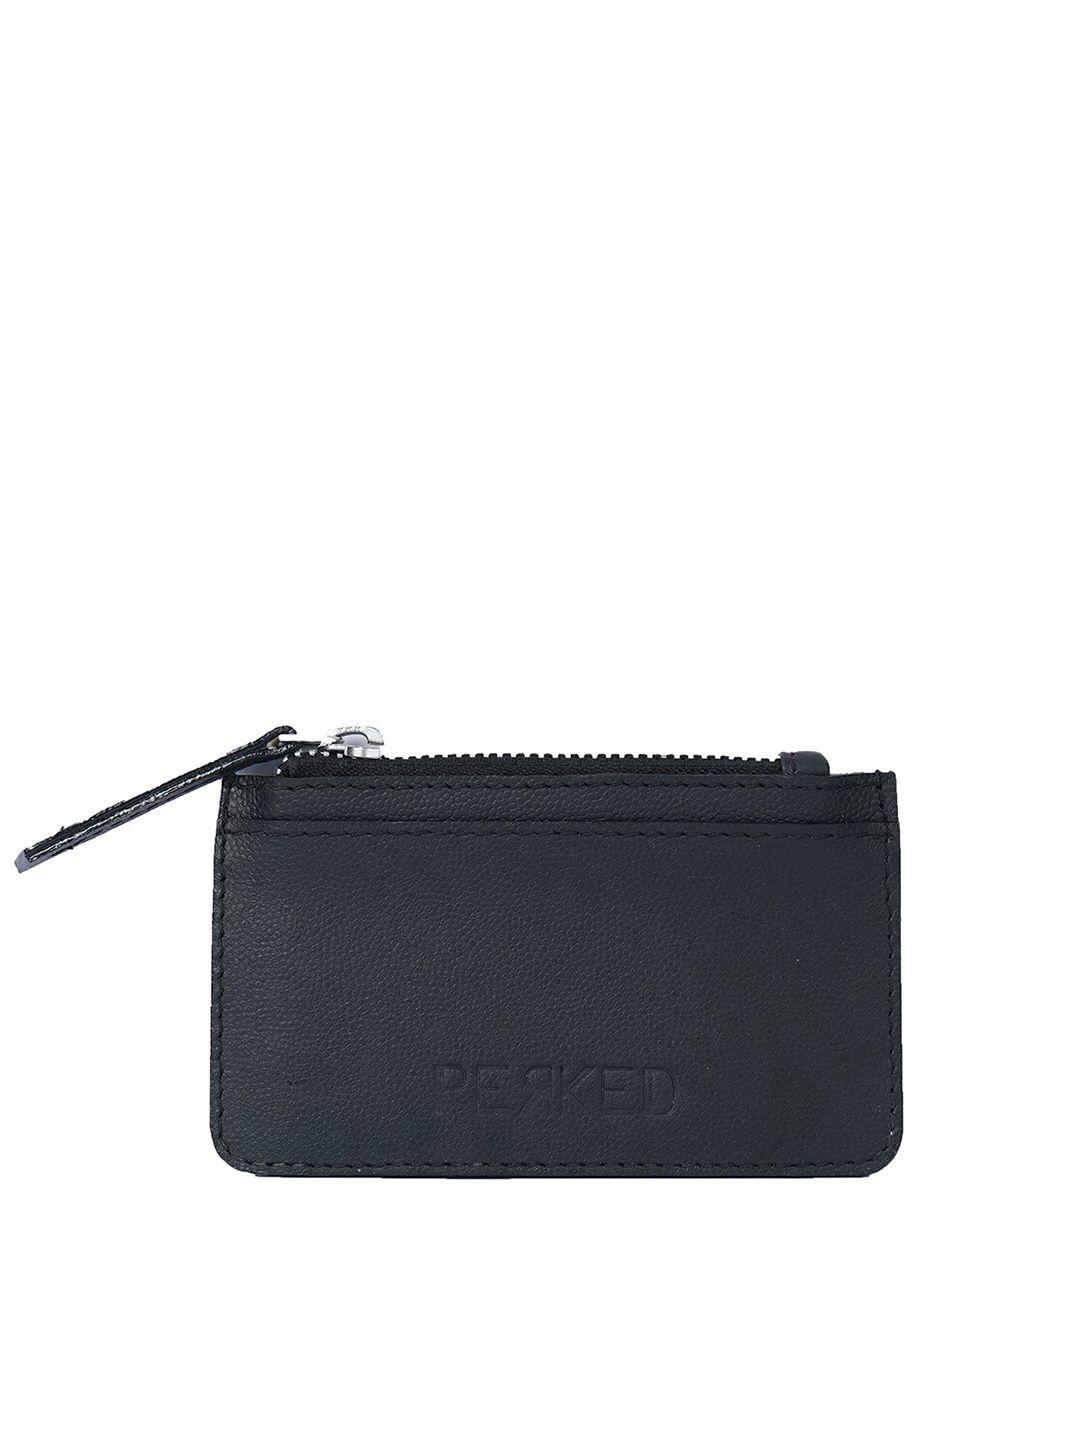 perked unisex black & silver-toned leather zip around wallet